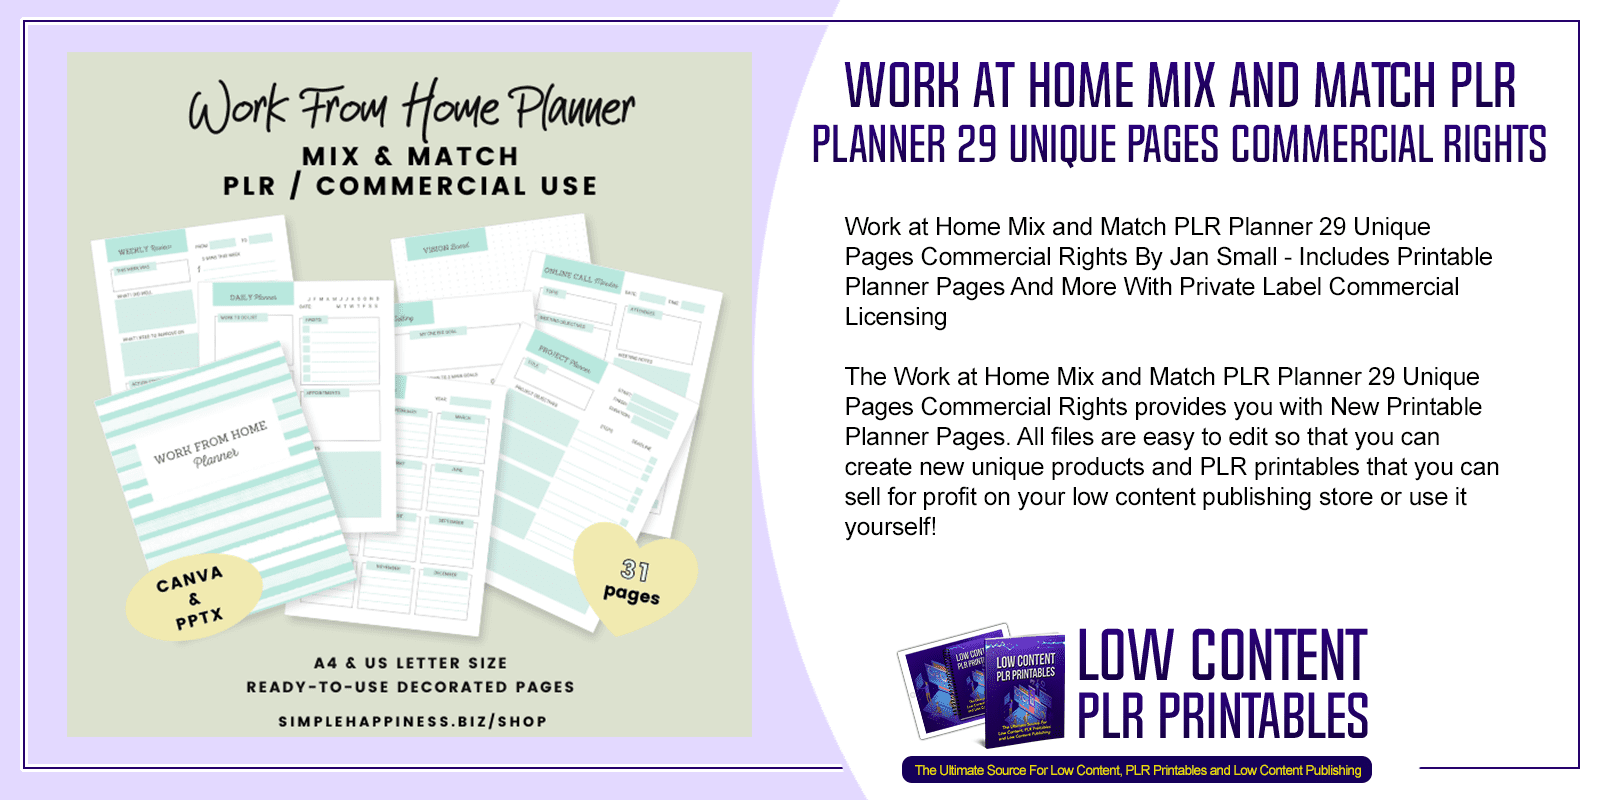 Work at Home Mix and Match PLR Planner 29 Unique Pages Commercial Rights